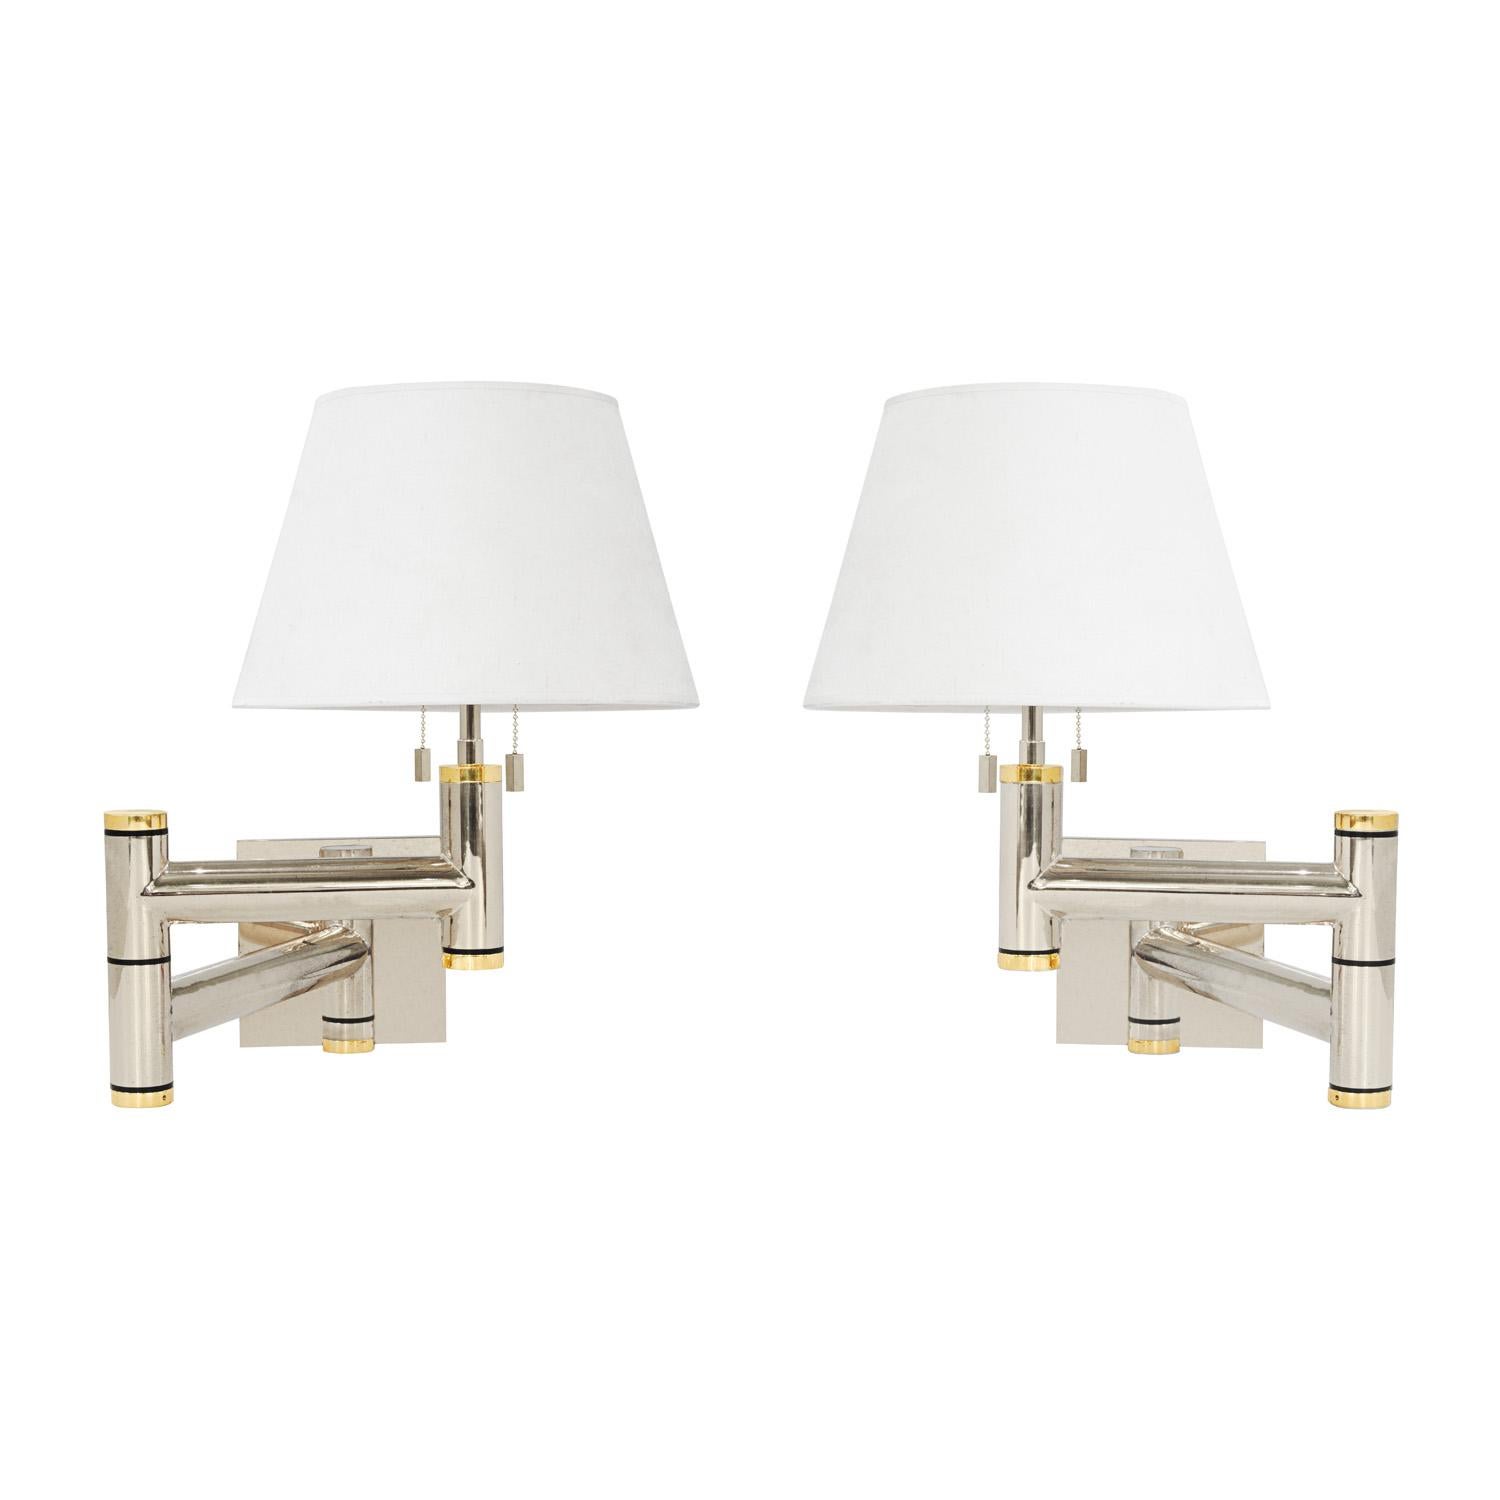 Pair of beautifully made swing-arm wall lamps in polished chrome and brass, each with 2 bulbs, by Karl Springer, American 1980's. Each comes with a back mounting plate. The craftsmanship on these is off the charts. These have been cleaned, polished